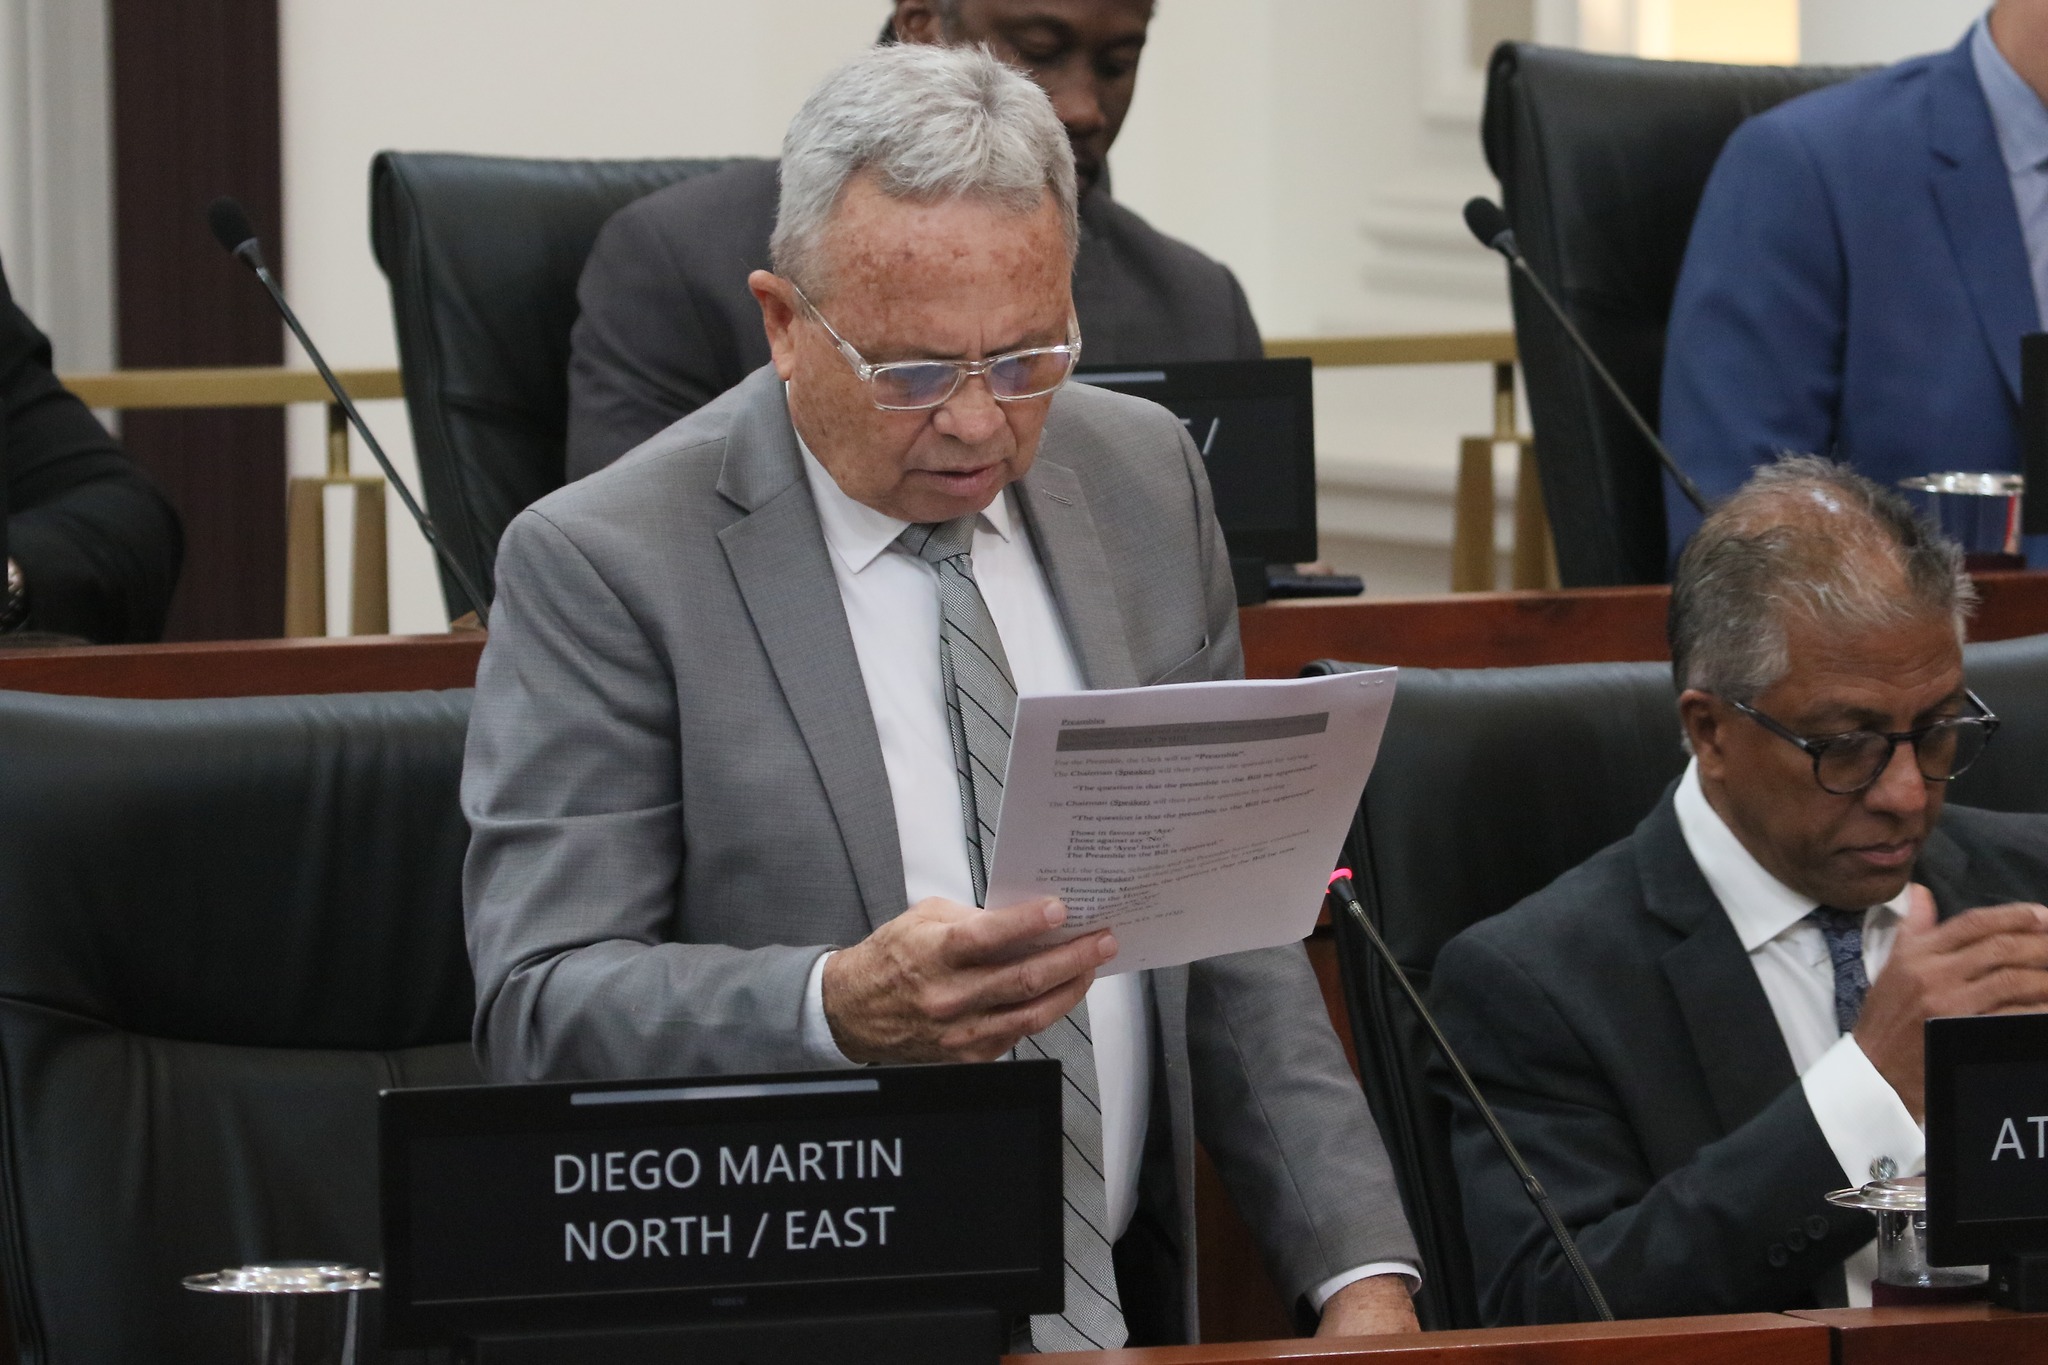 Procurement amendments will not “water down or erode” objective of the act says Imbert